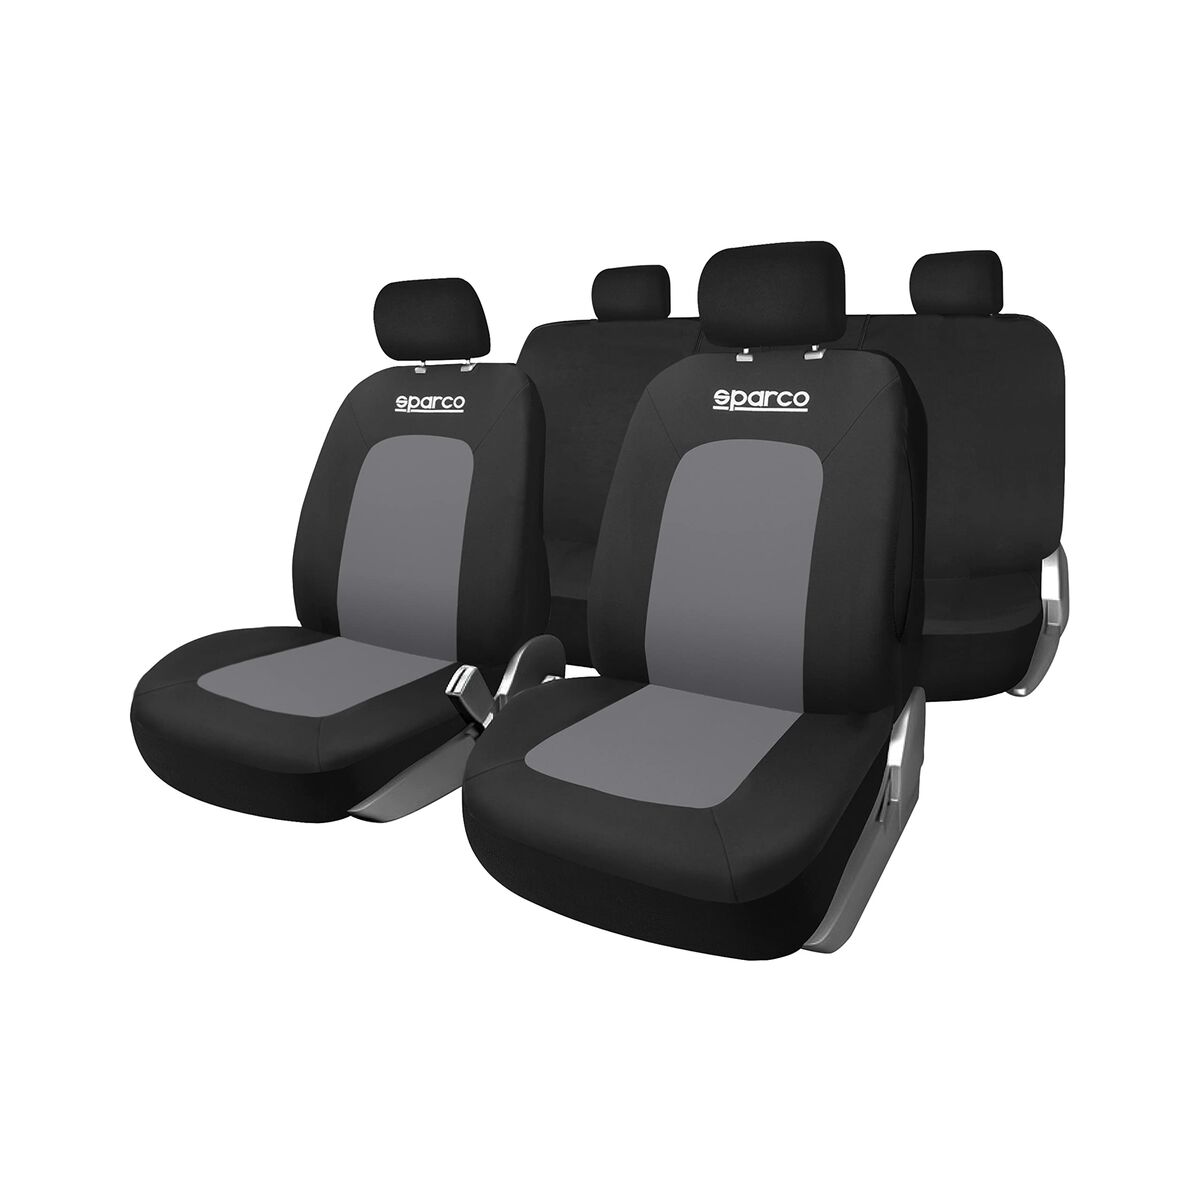 SPARCO Seat Covers Sport (Black & Grey)